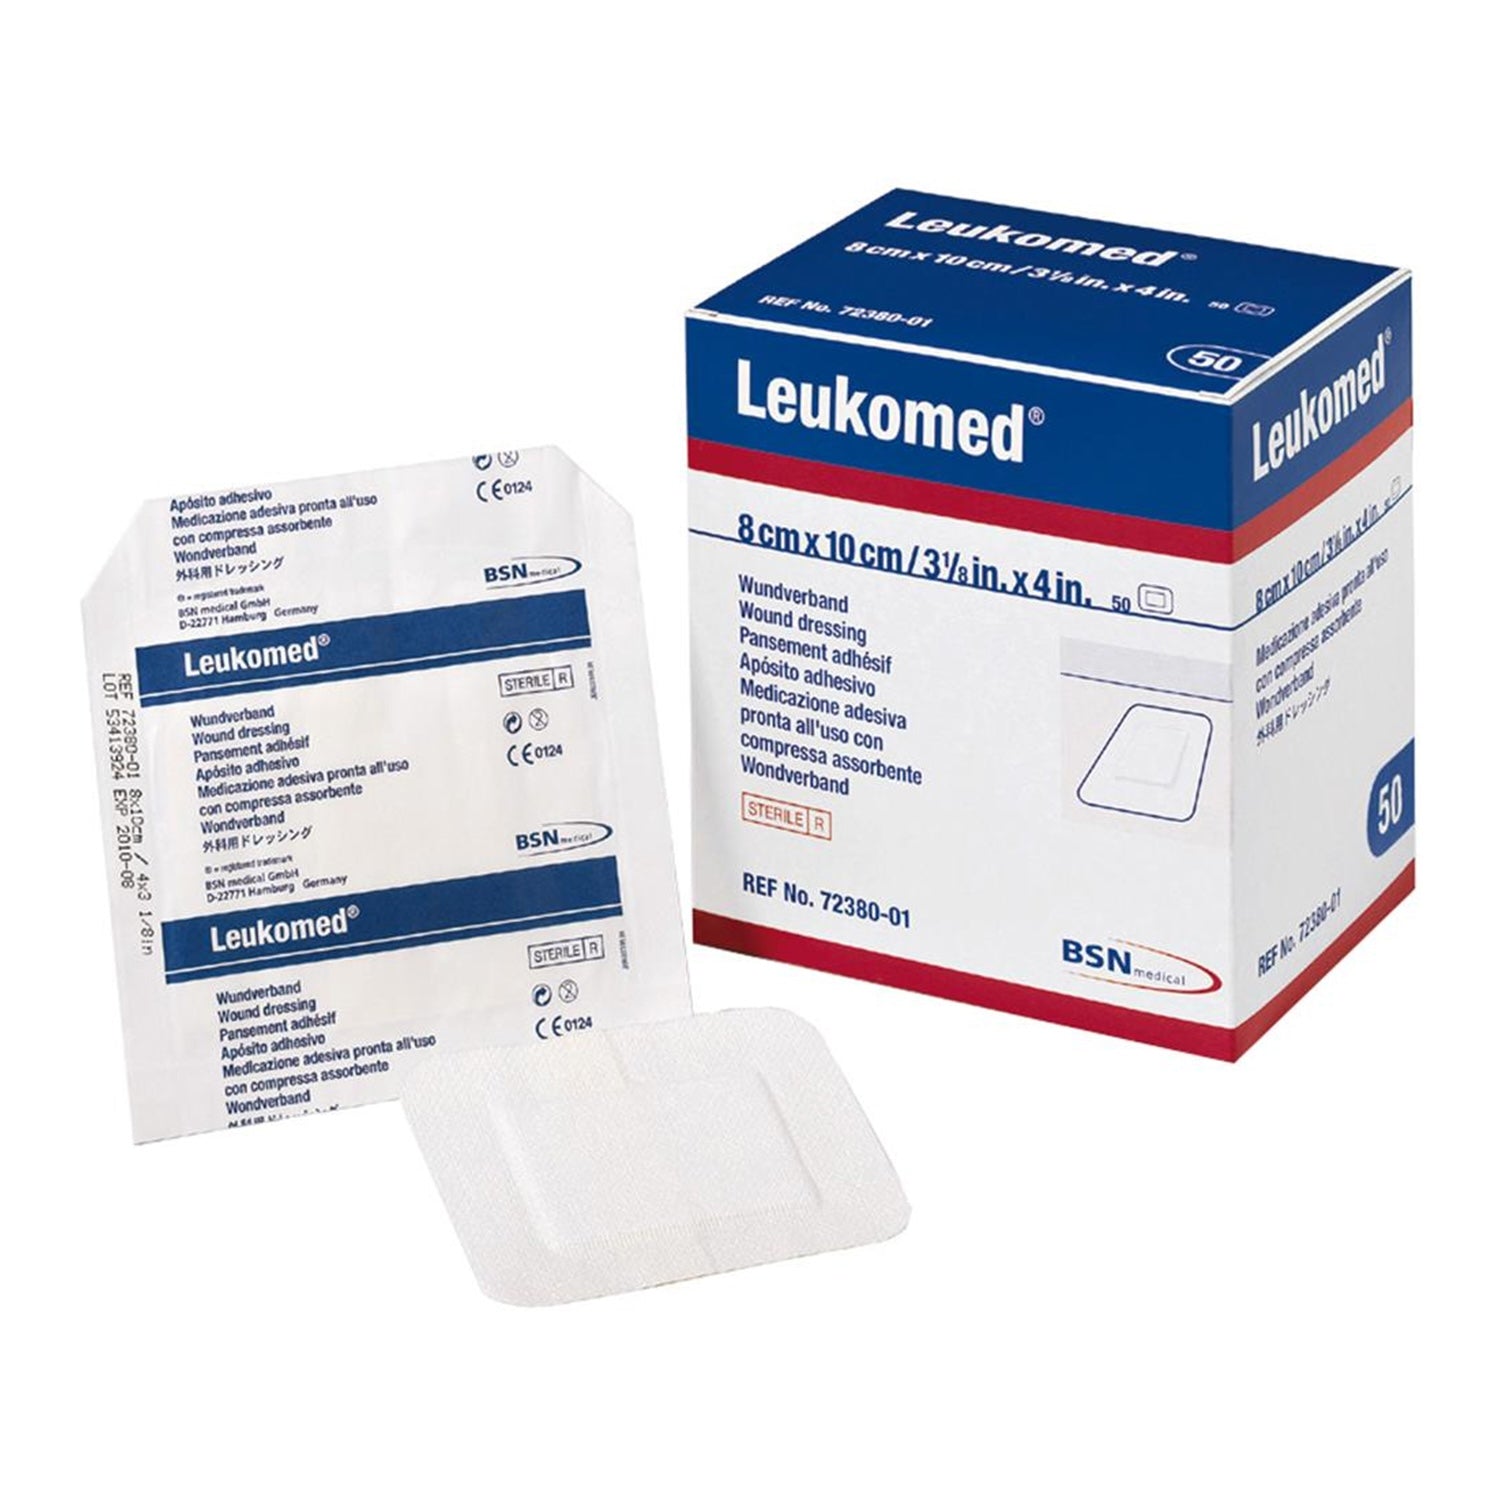 Leukomed Dressings | Non Woven Wound Dressing | 8 x 10cm | Pack of 50 (3)